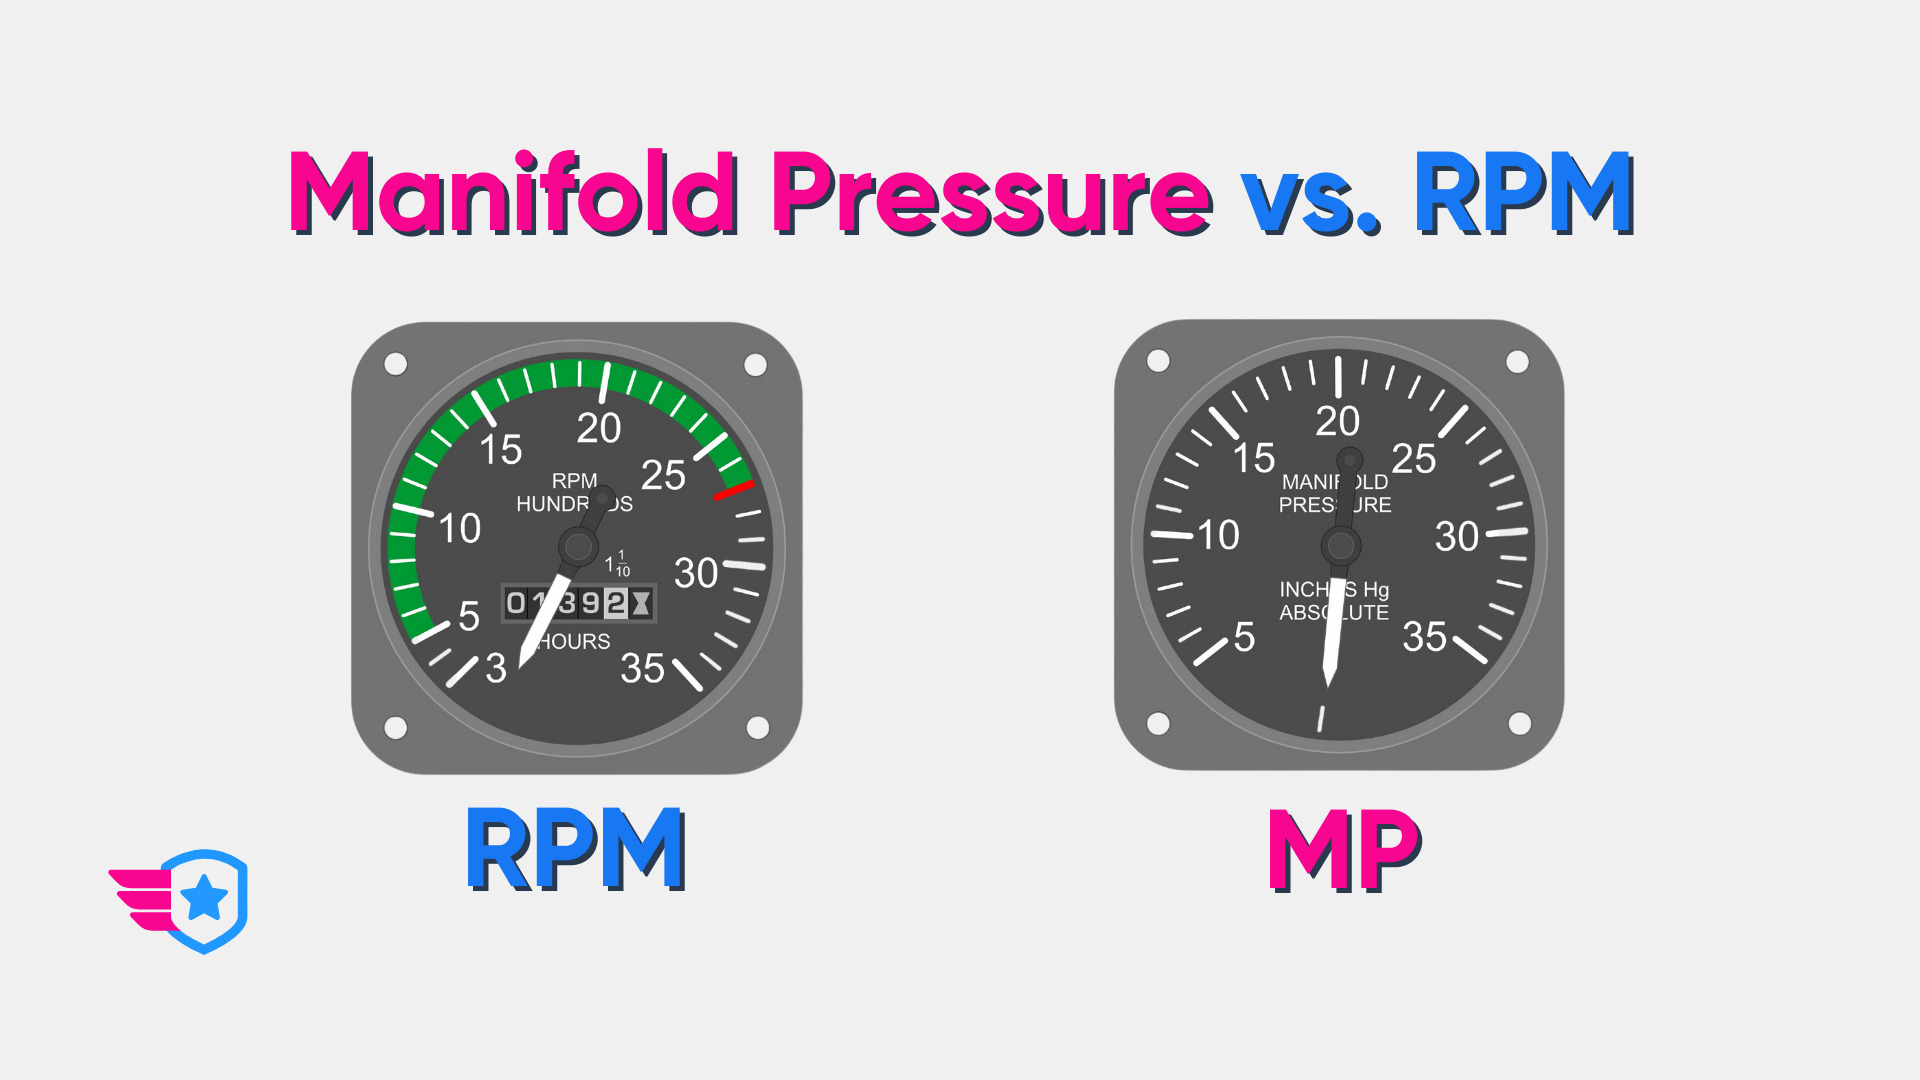 Manifold Pressure vs. RPM: What's the Difference?